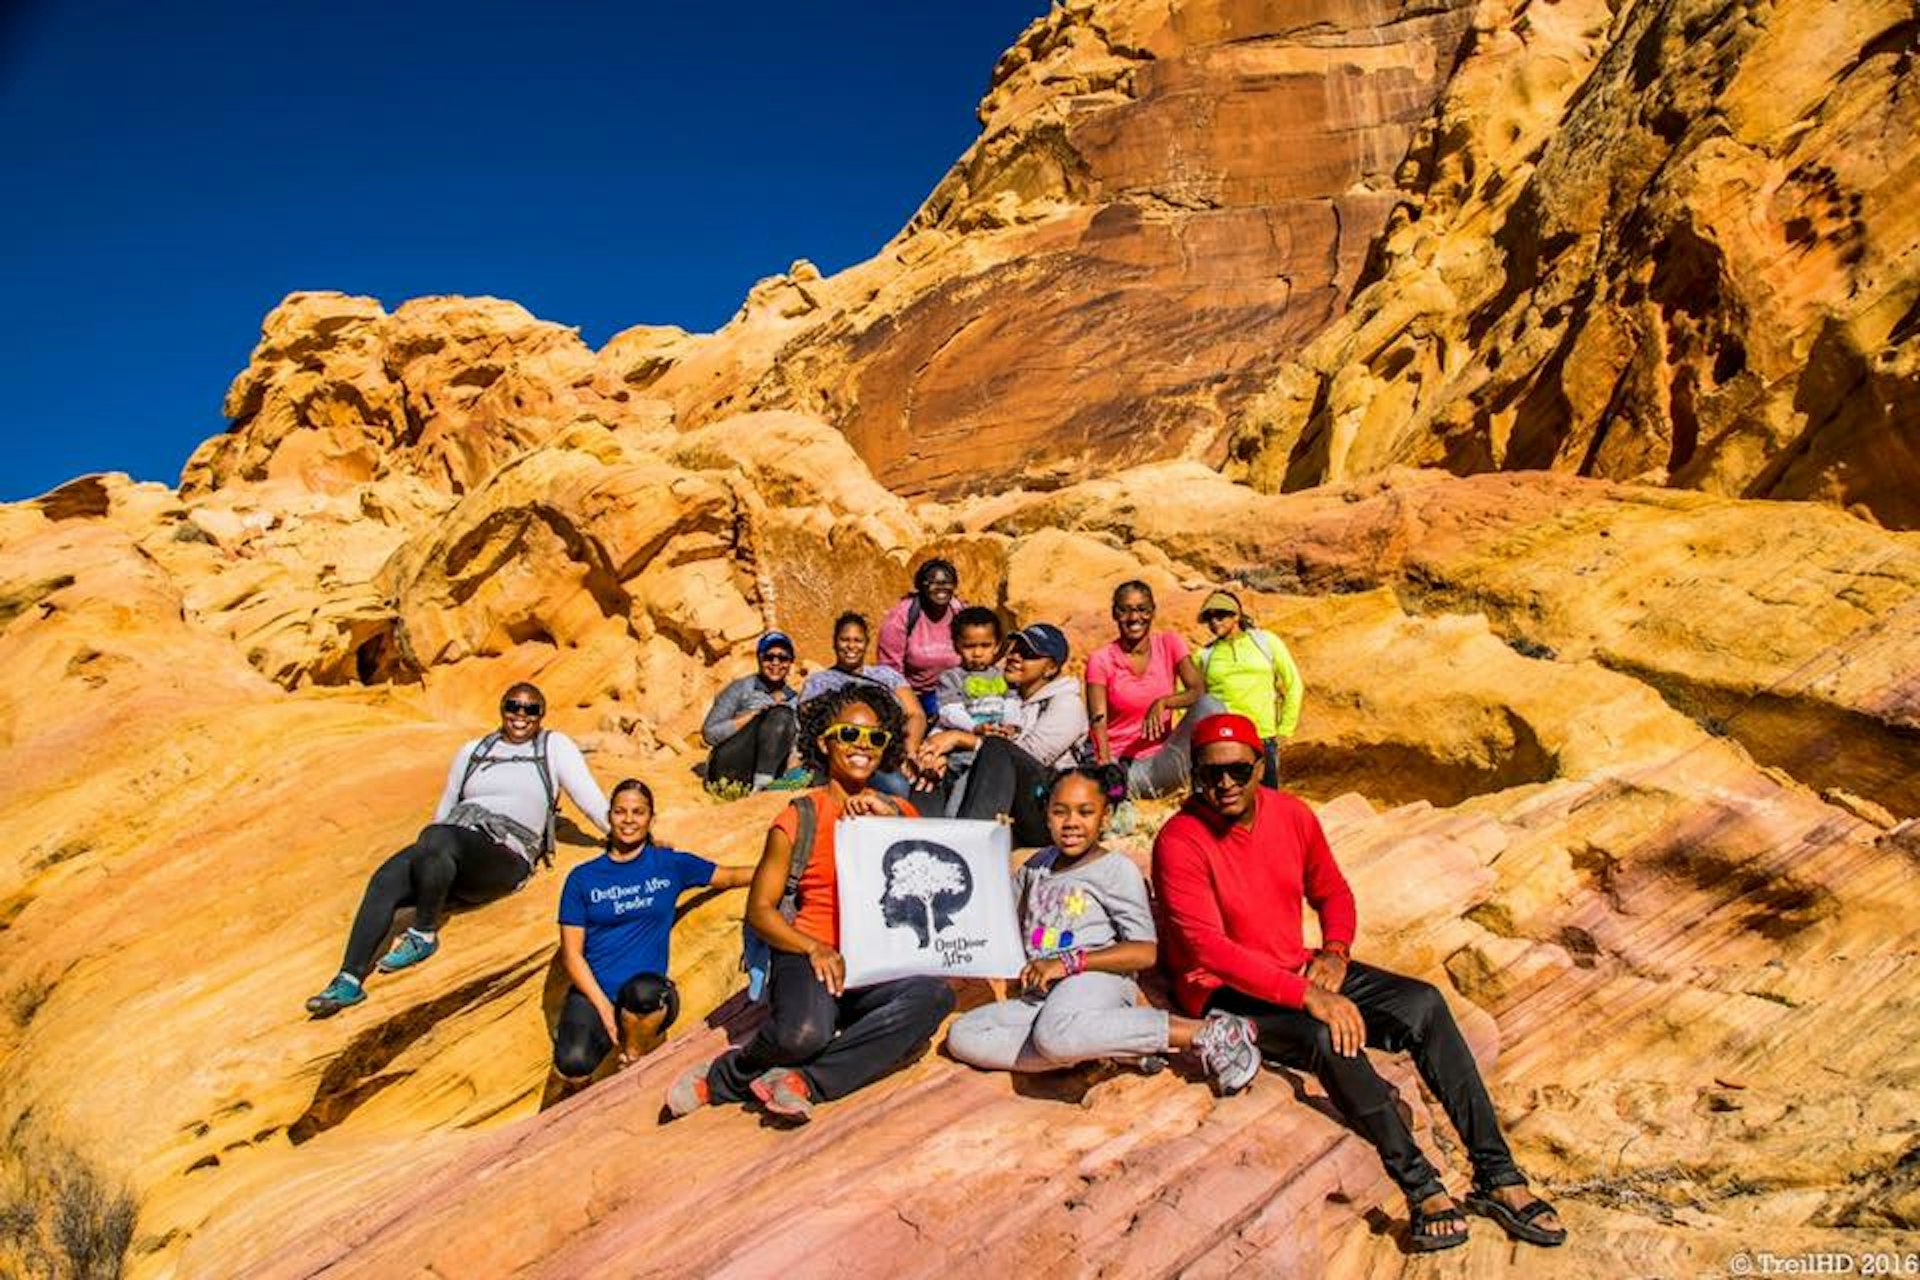 A group of black hikers pose with a small Outdoor Afro banner on the side of sand-colored rocks